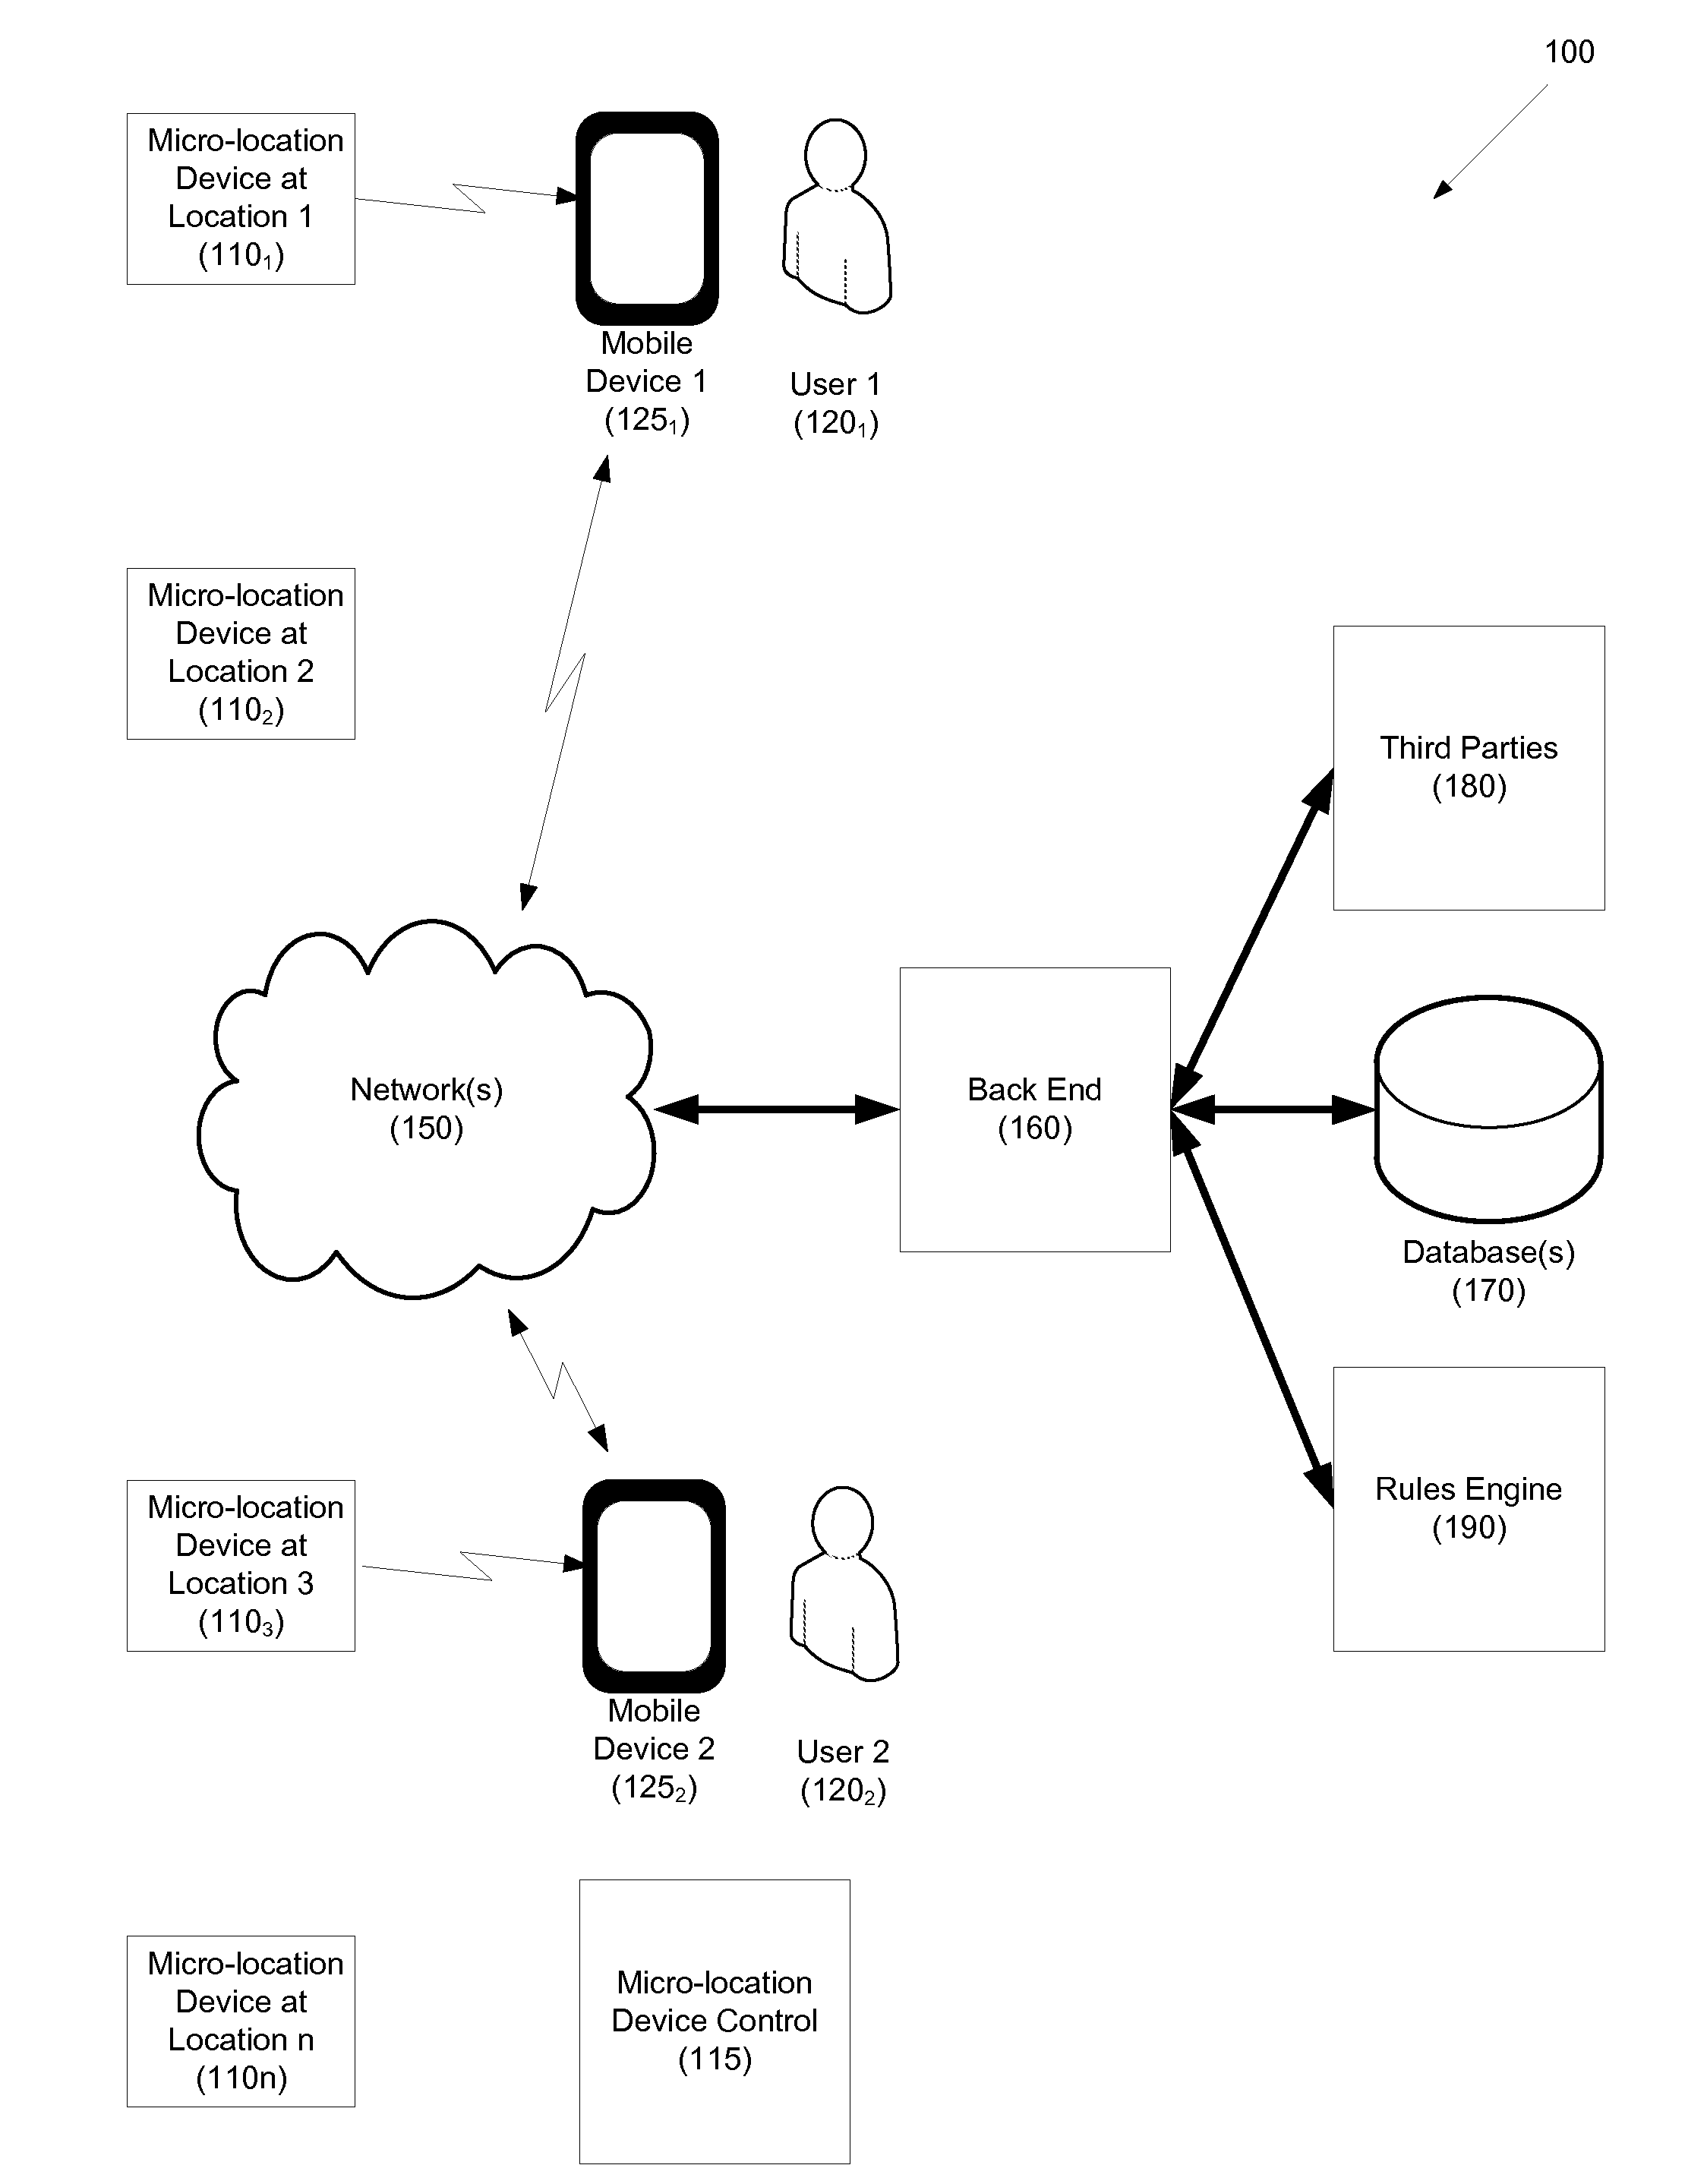 Systems and methods for leveraging micro-location devices for improved travel awareness